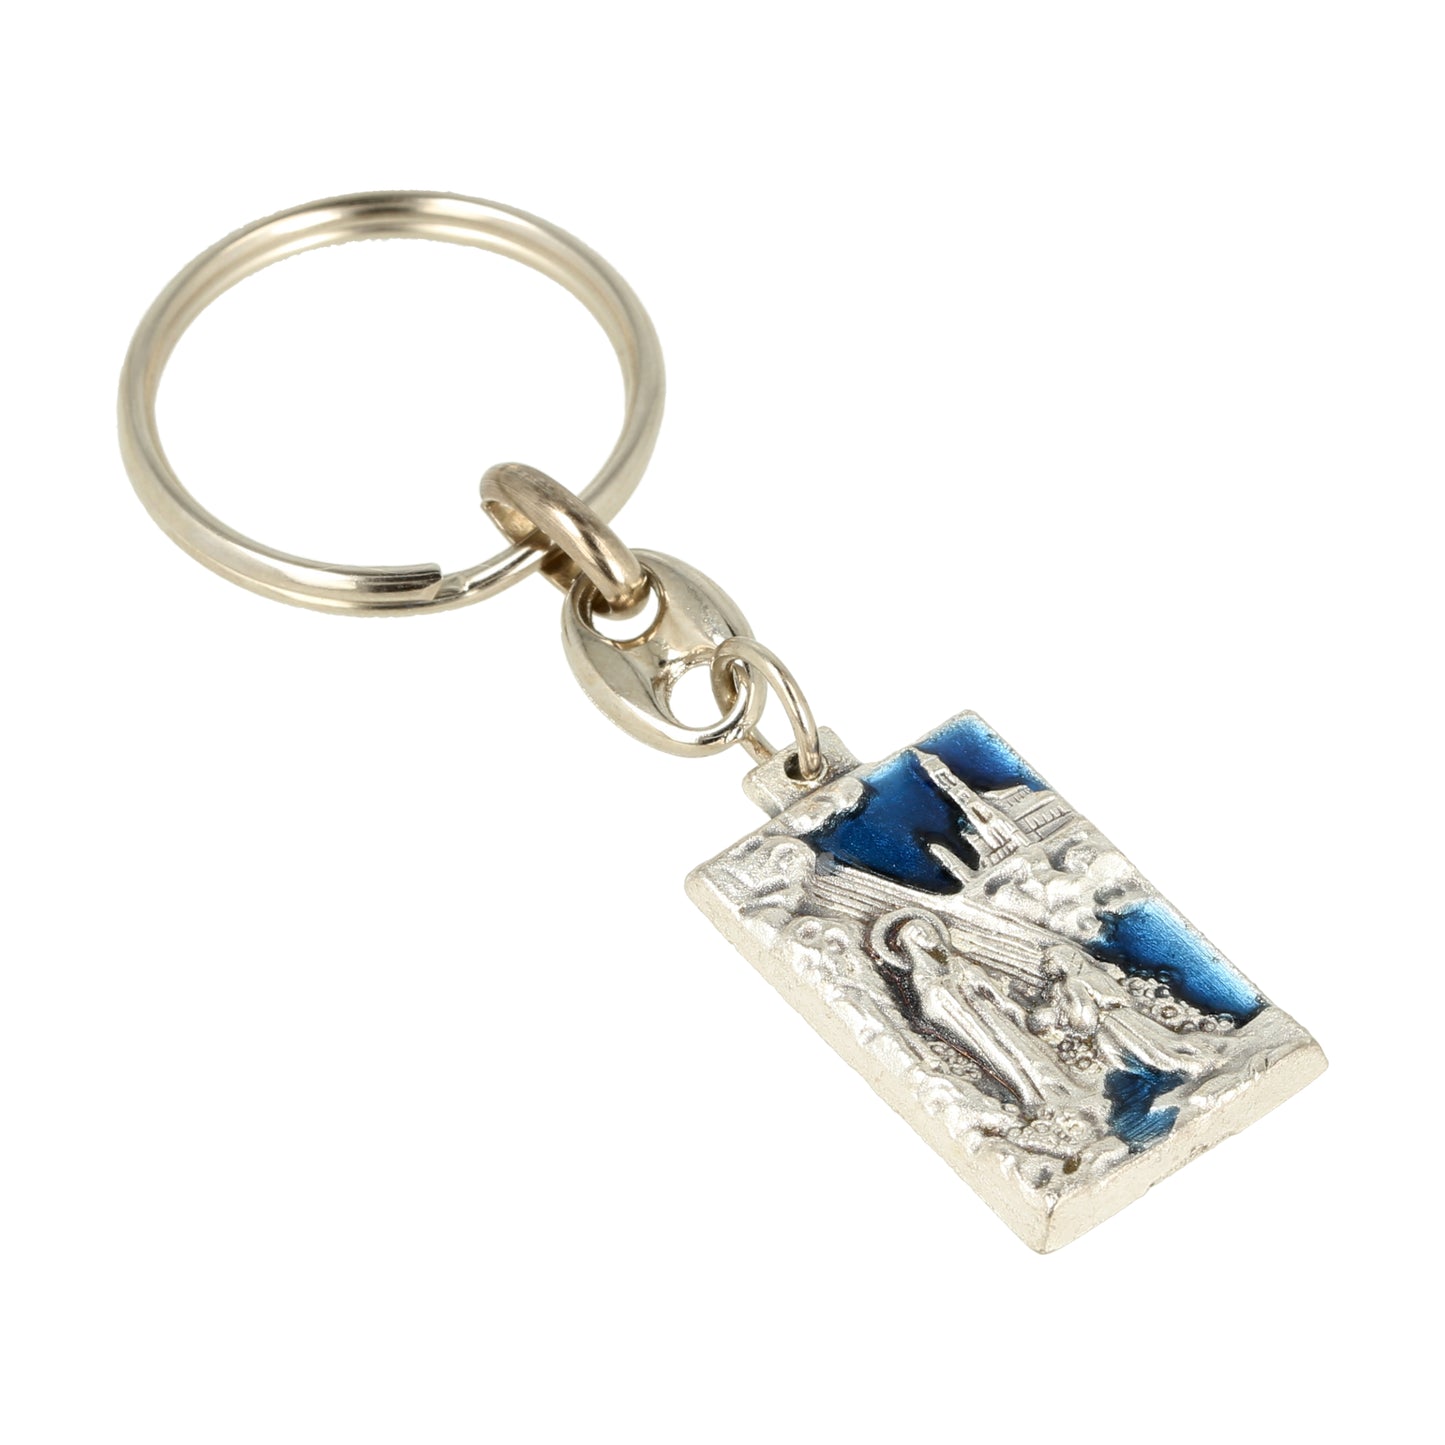 Keychain V. of Lourdes Lourdes Grotto Blue Resin. Souvenirs from Italy